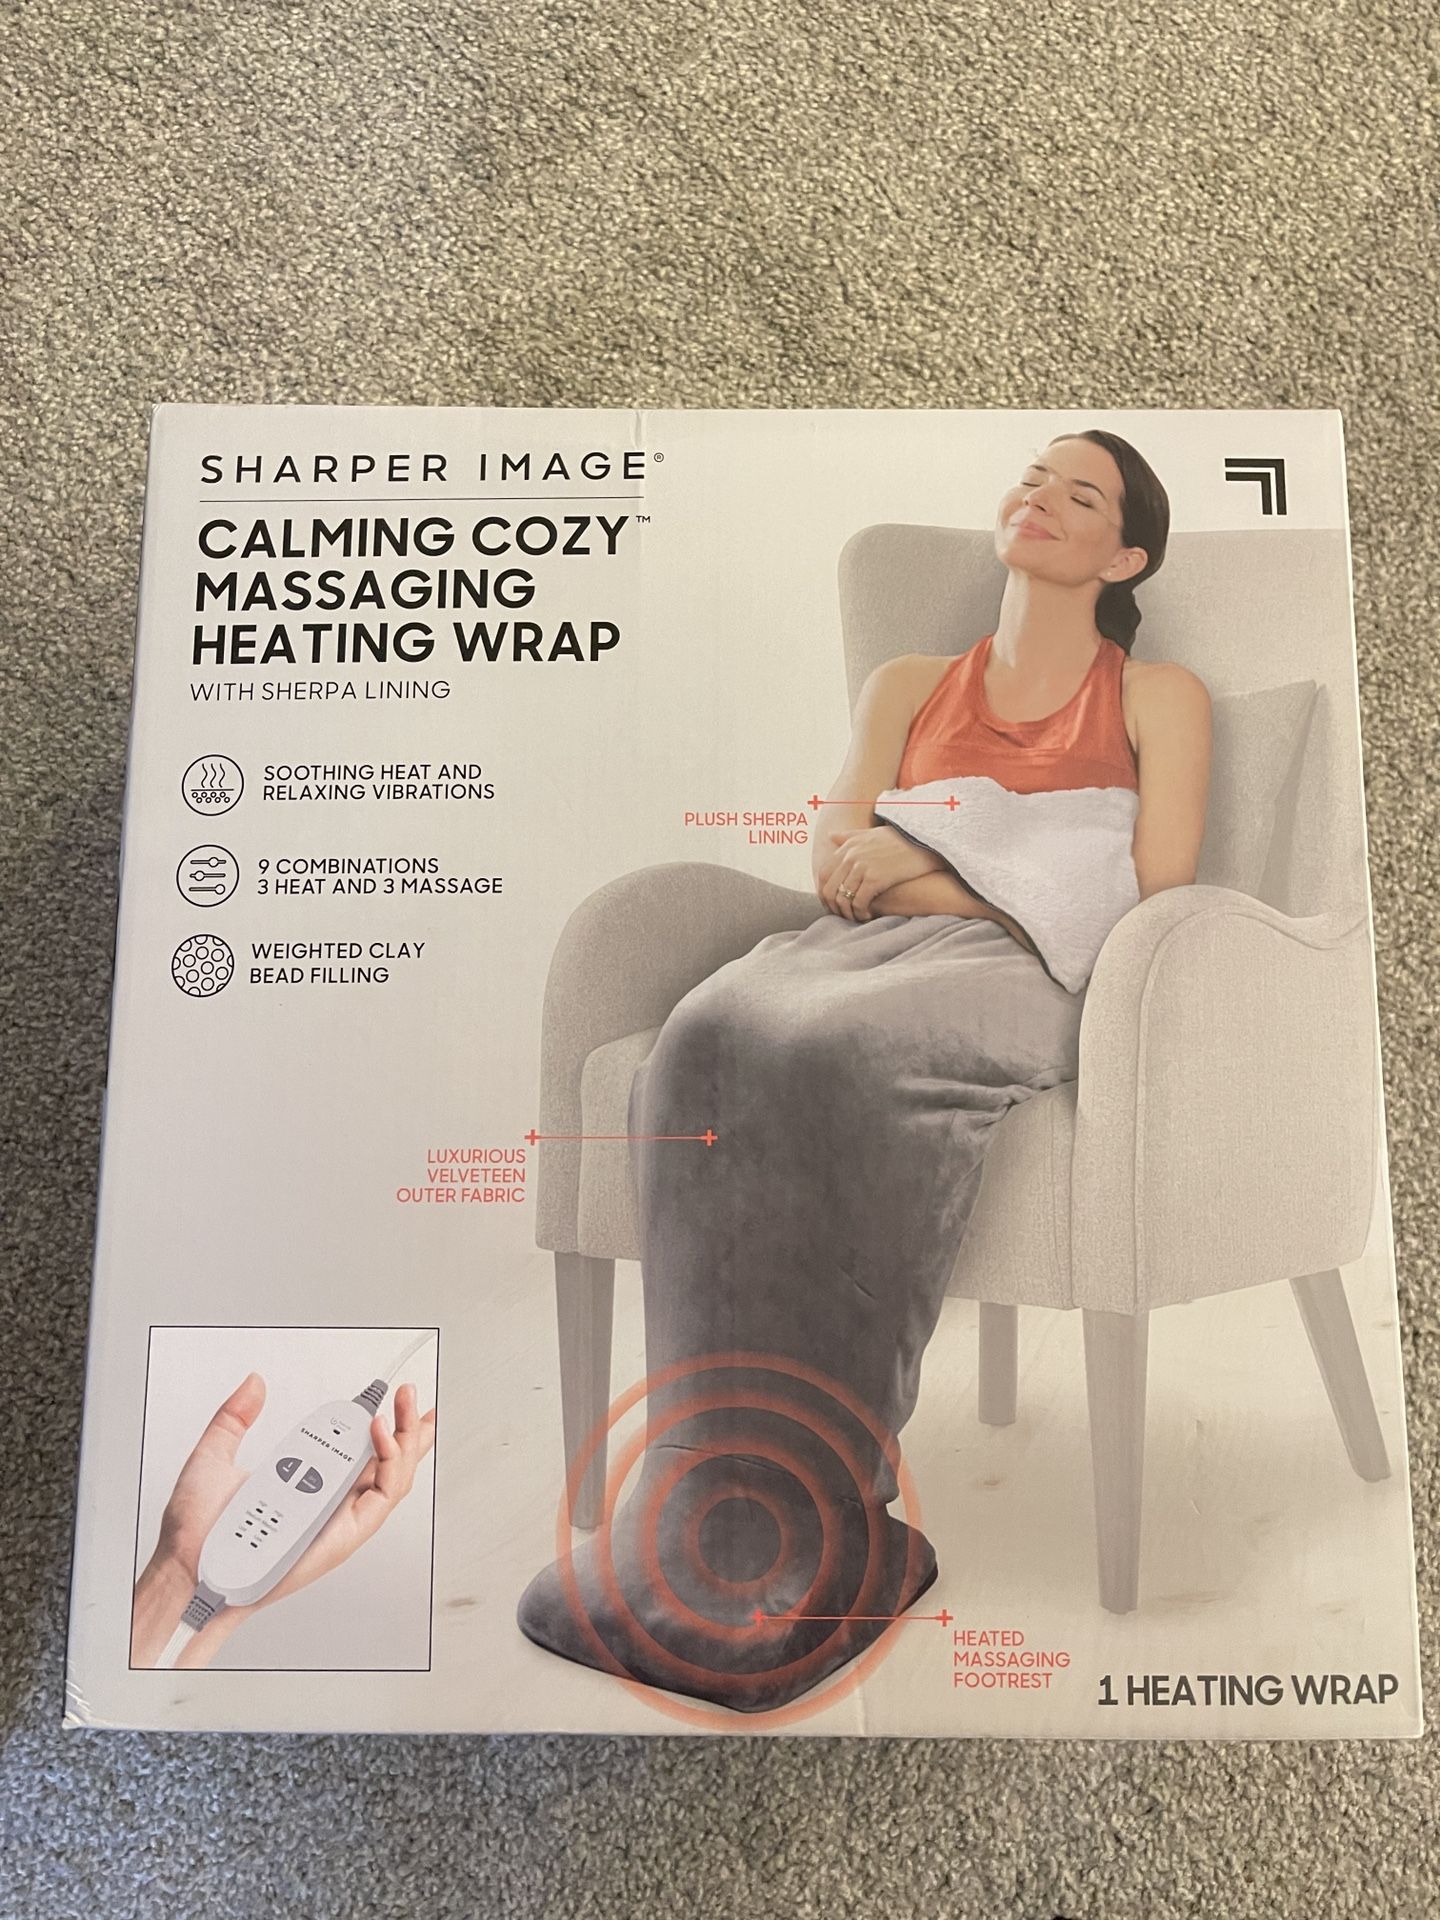 Calming Cozy by Sharper Image Personal Sherpa Wrap